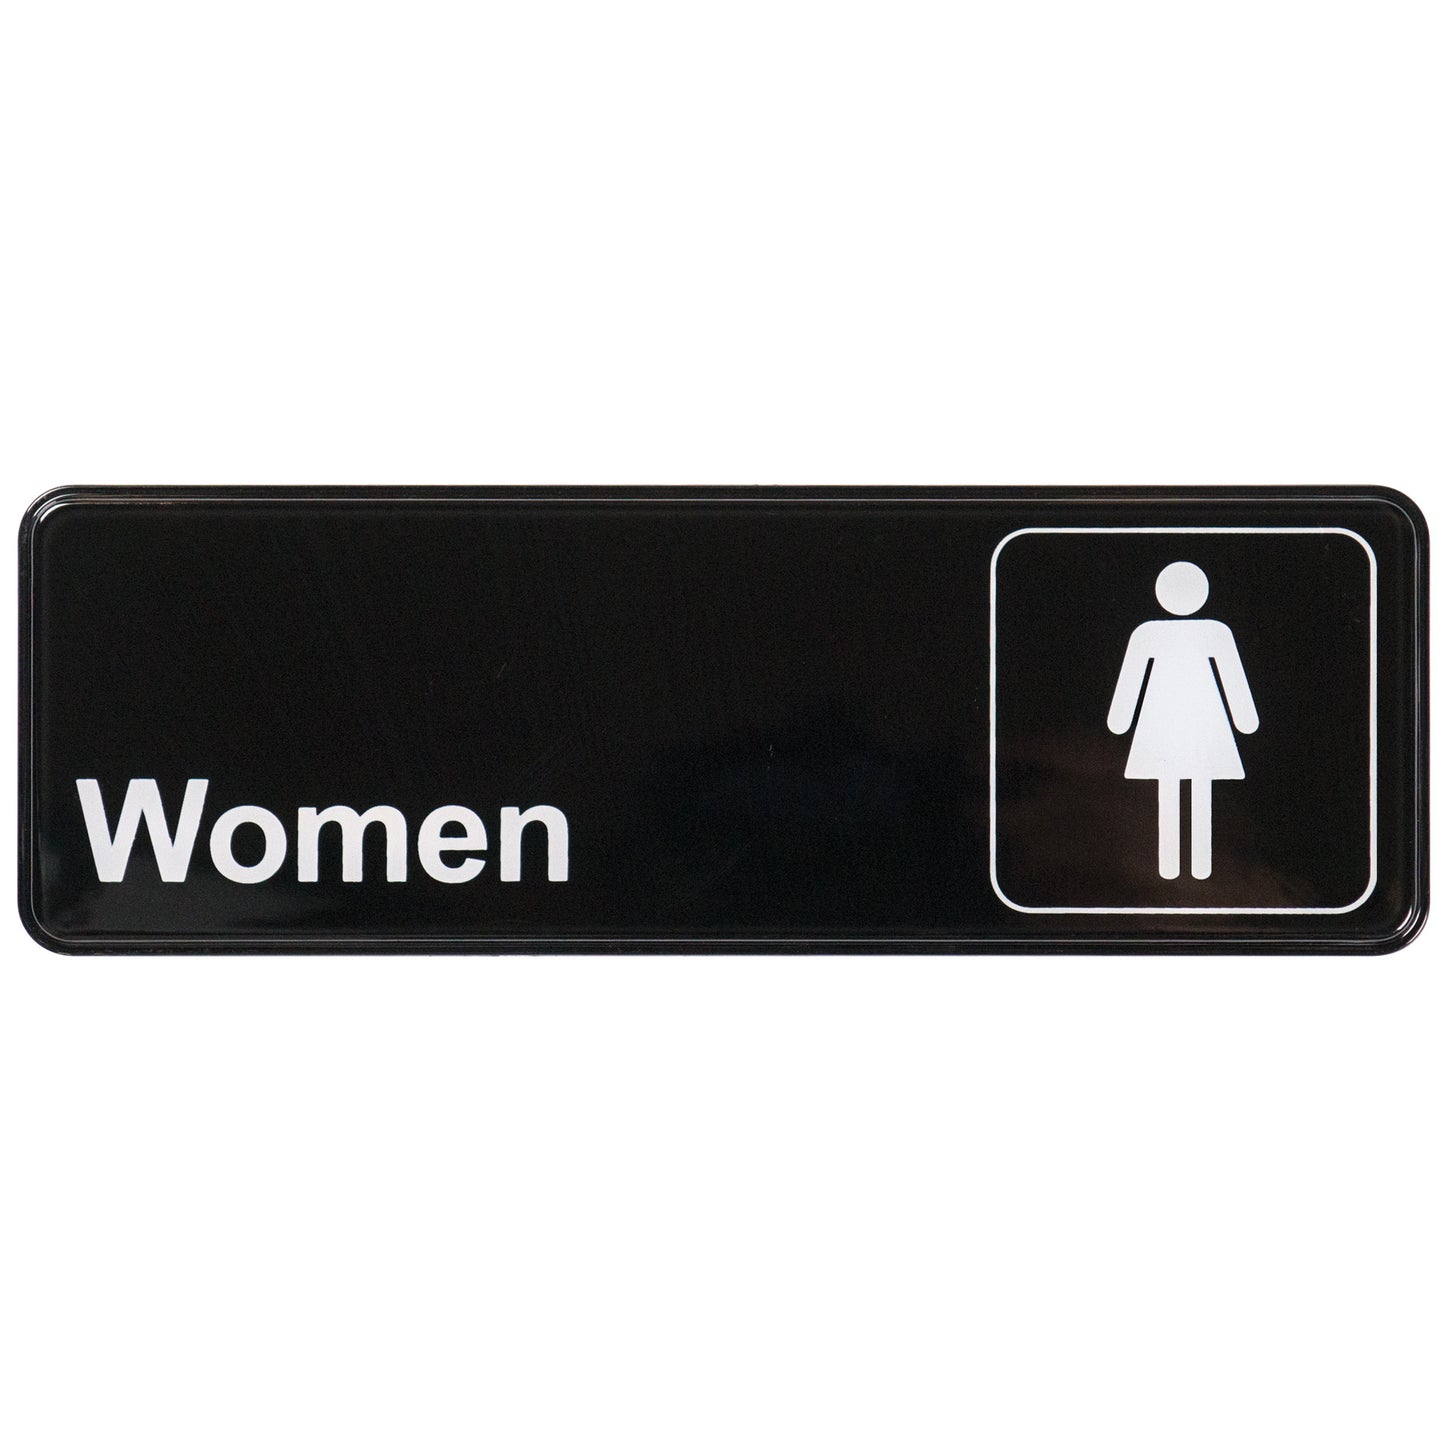 SGN-312 - Information Signs, 9"W x 3"H - SGN-312 - Women